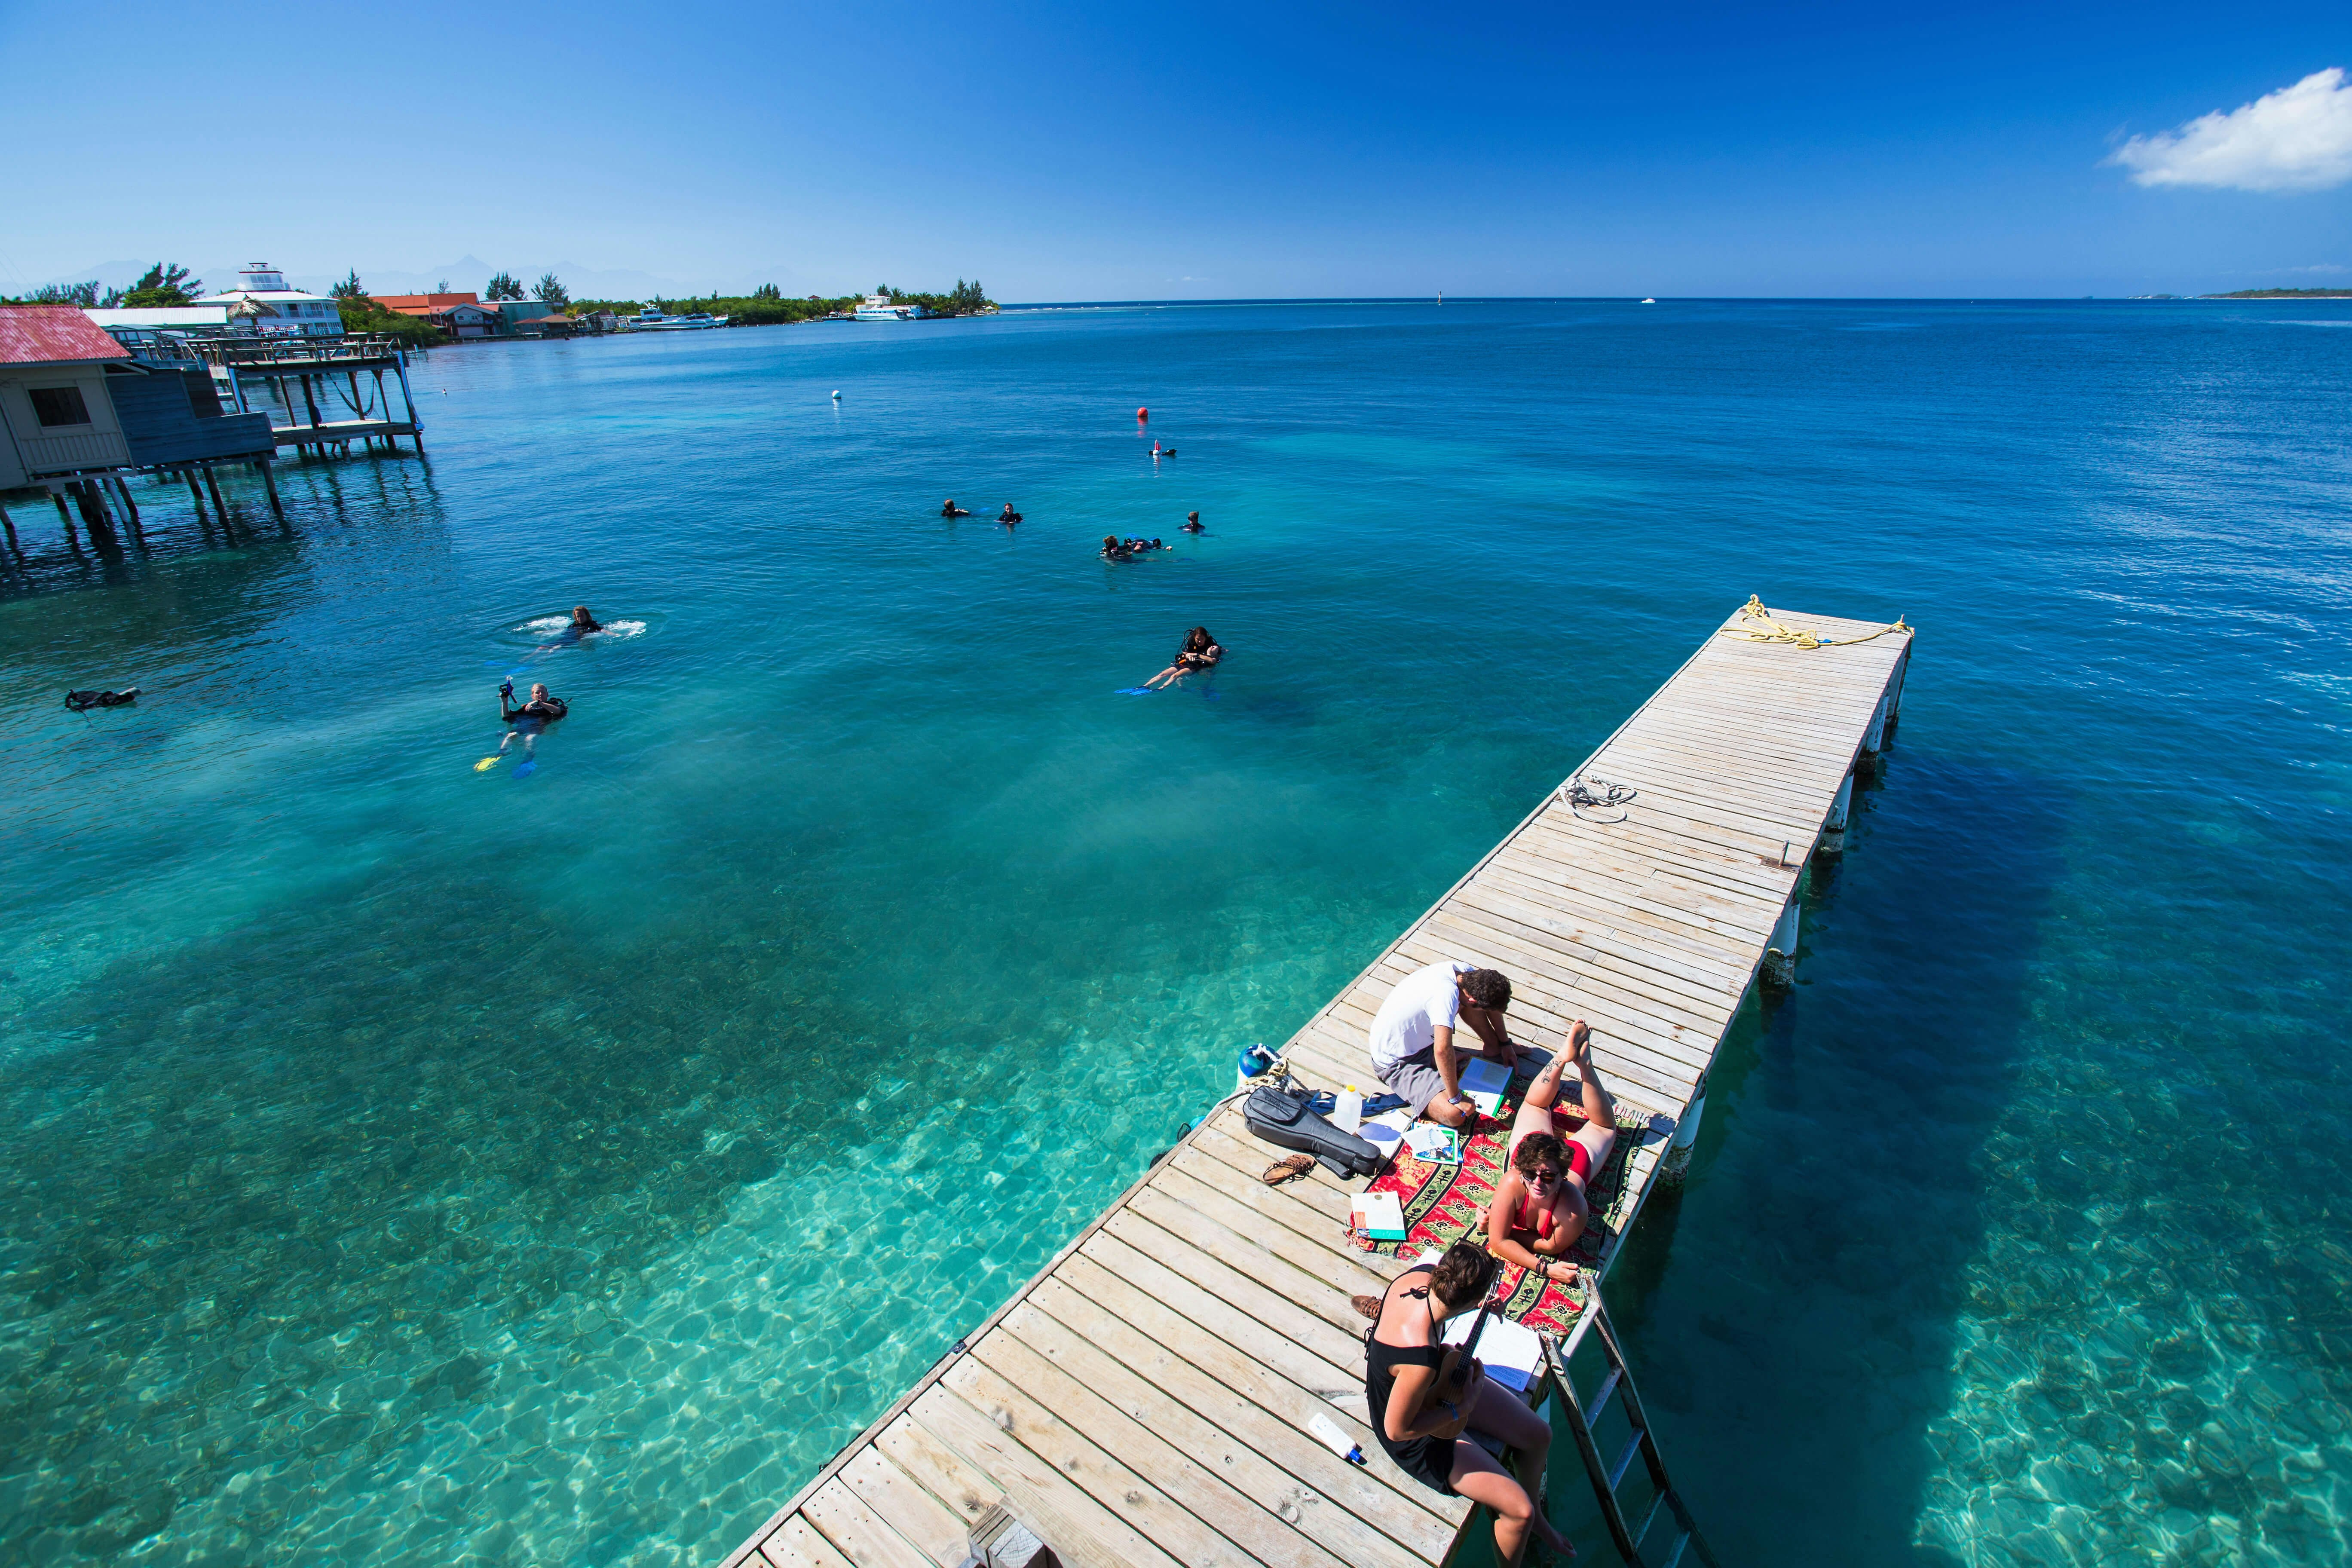 Girls play music in the sun on a Utila dock with snorkelers in the blue-green water behind them